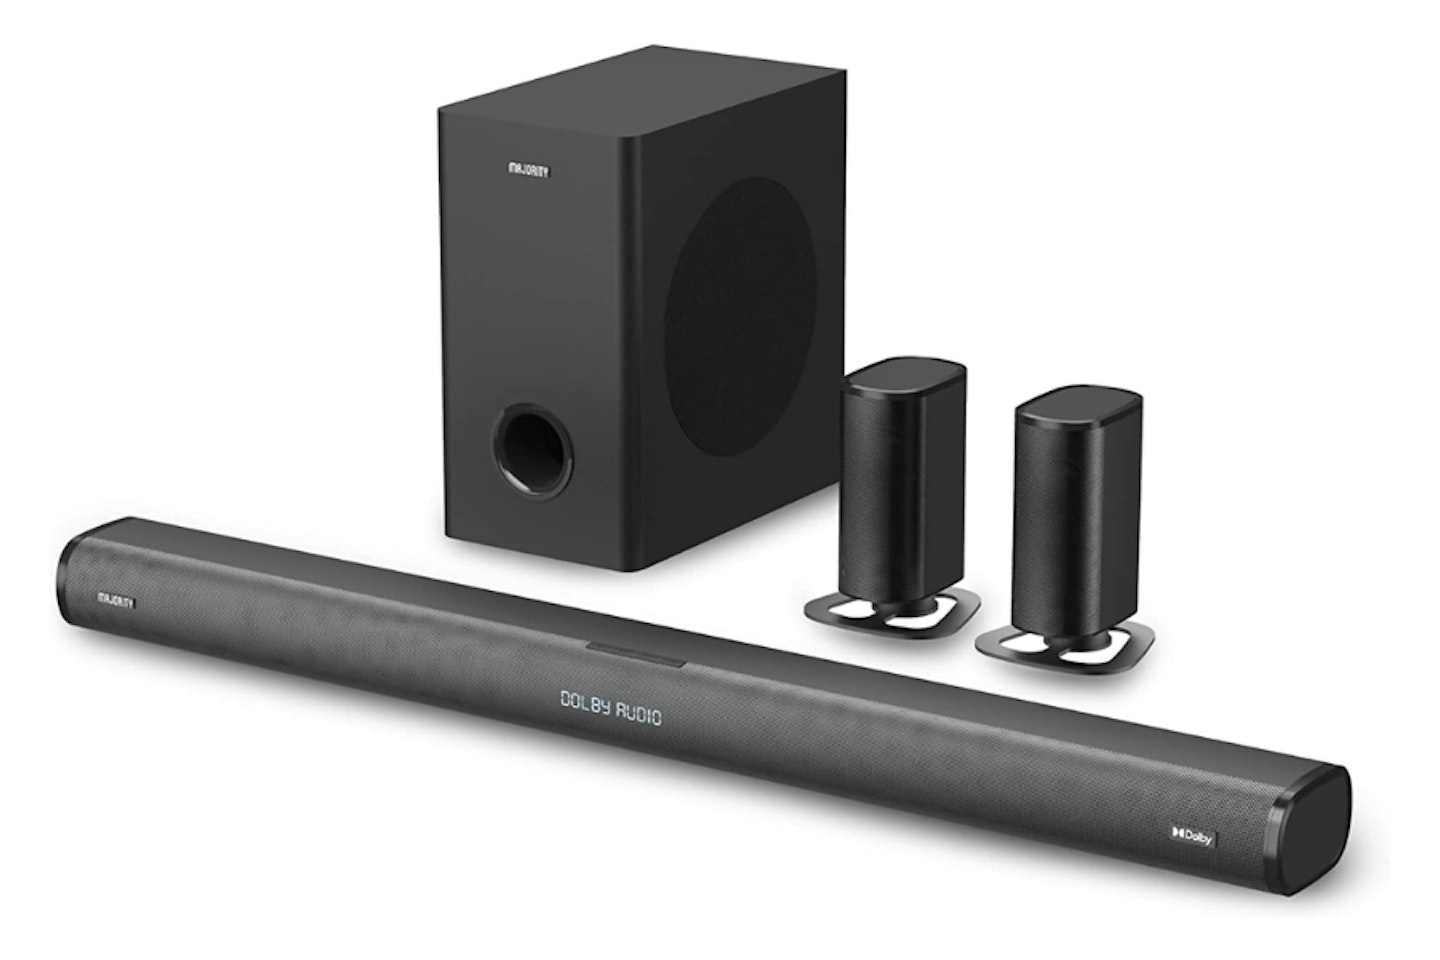 Majority Everest 5.1 Dolby Audio Surround Sound System with Sound Bar